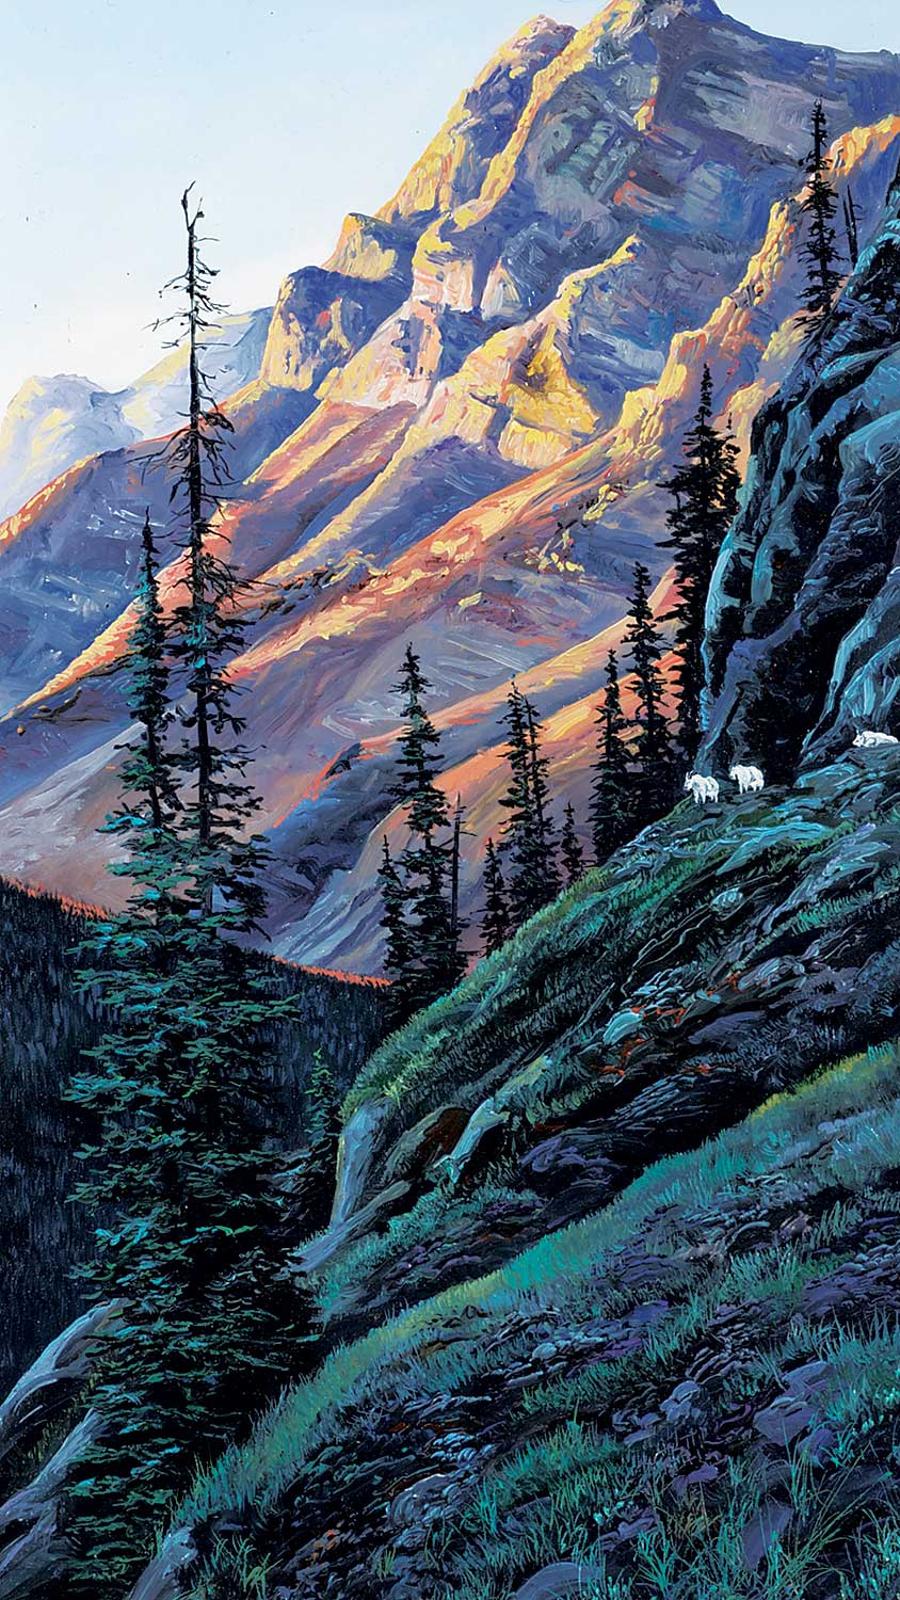 Andrew Kiss (1946) - Untitled - Mountain Goats at Dusk